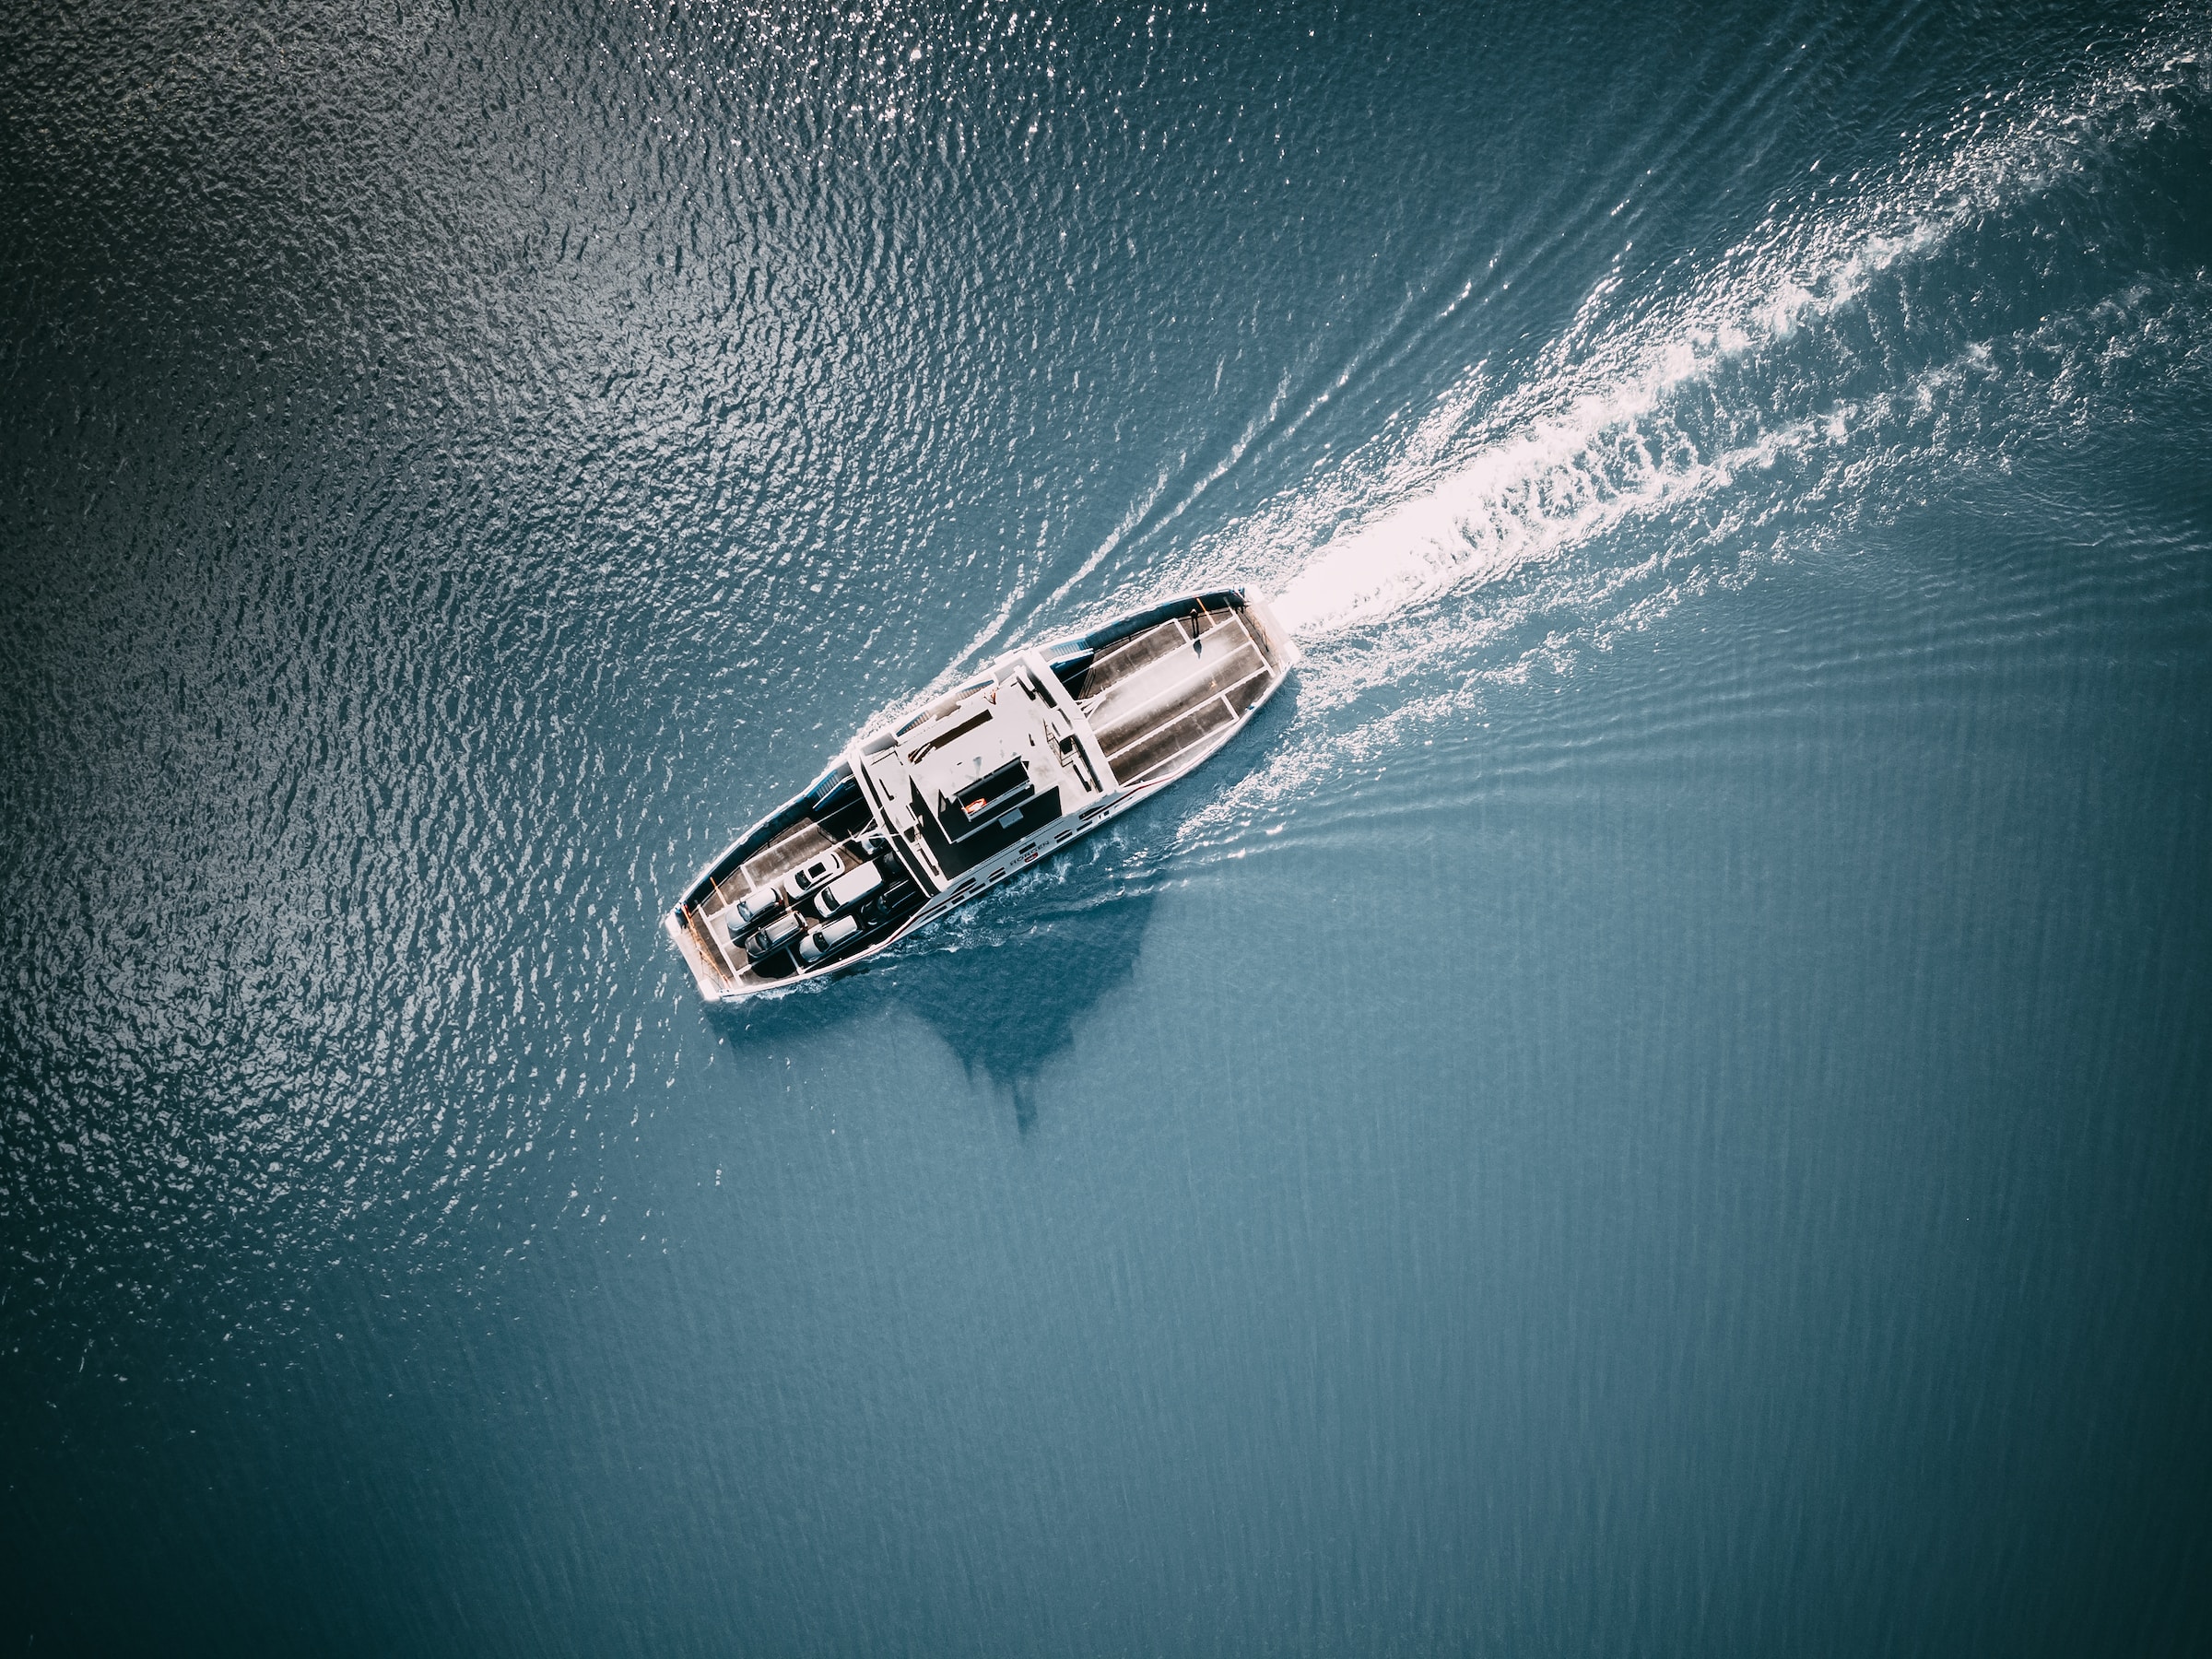 How Can Hydrogen Support the Decarbonisation of Ferries?